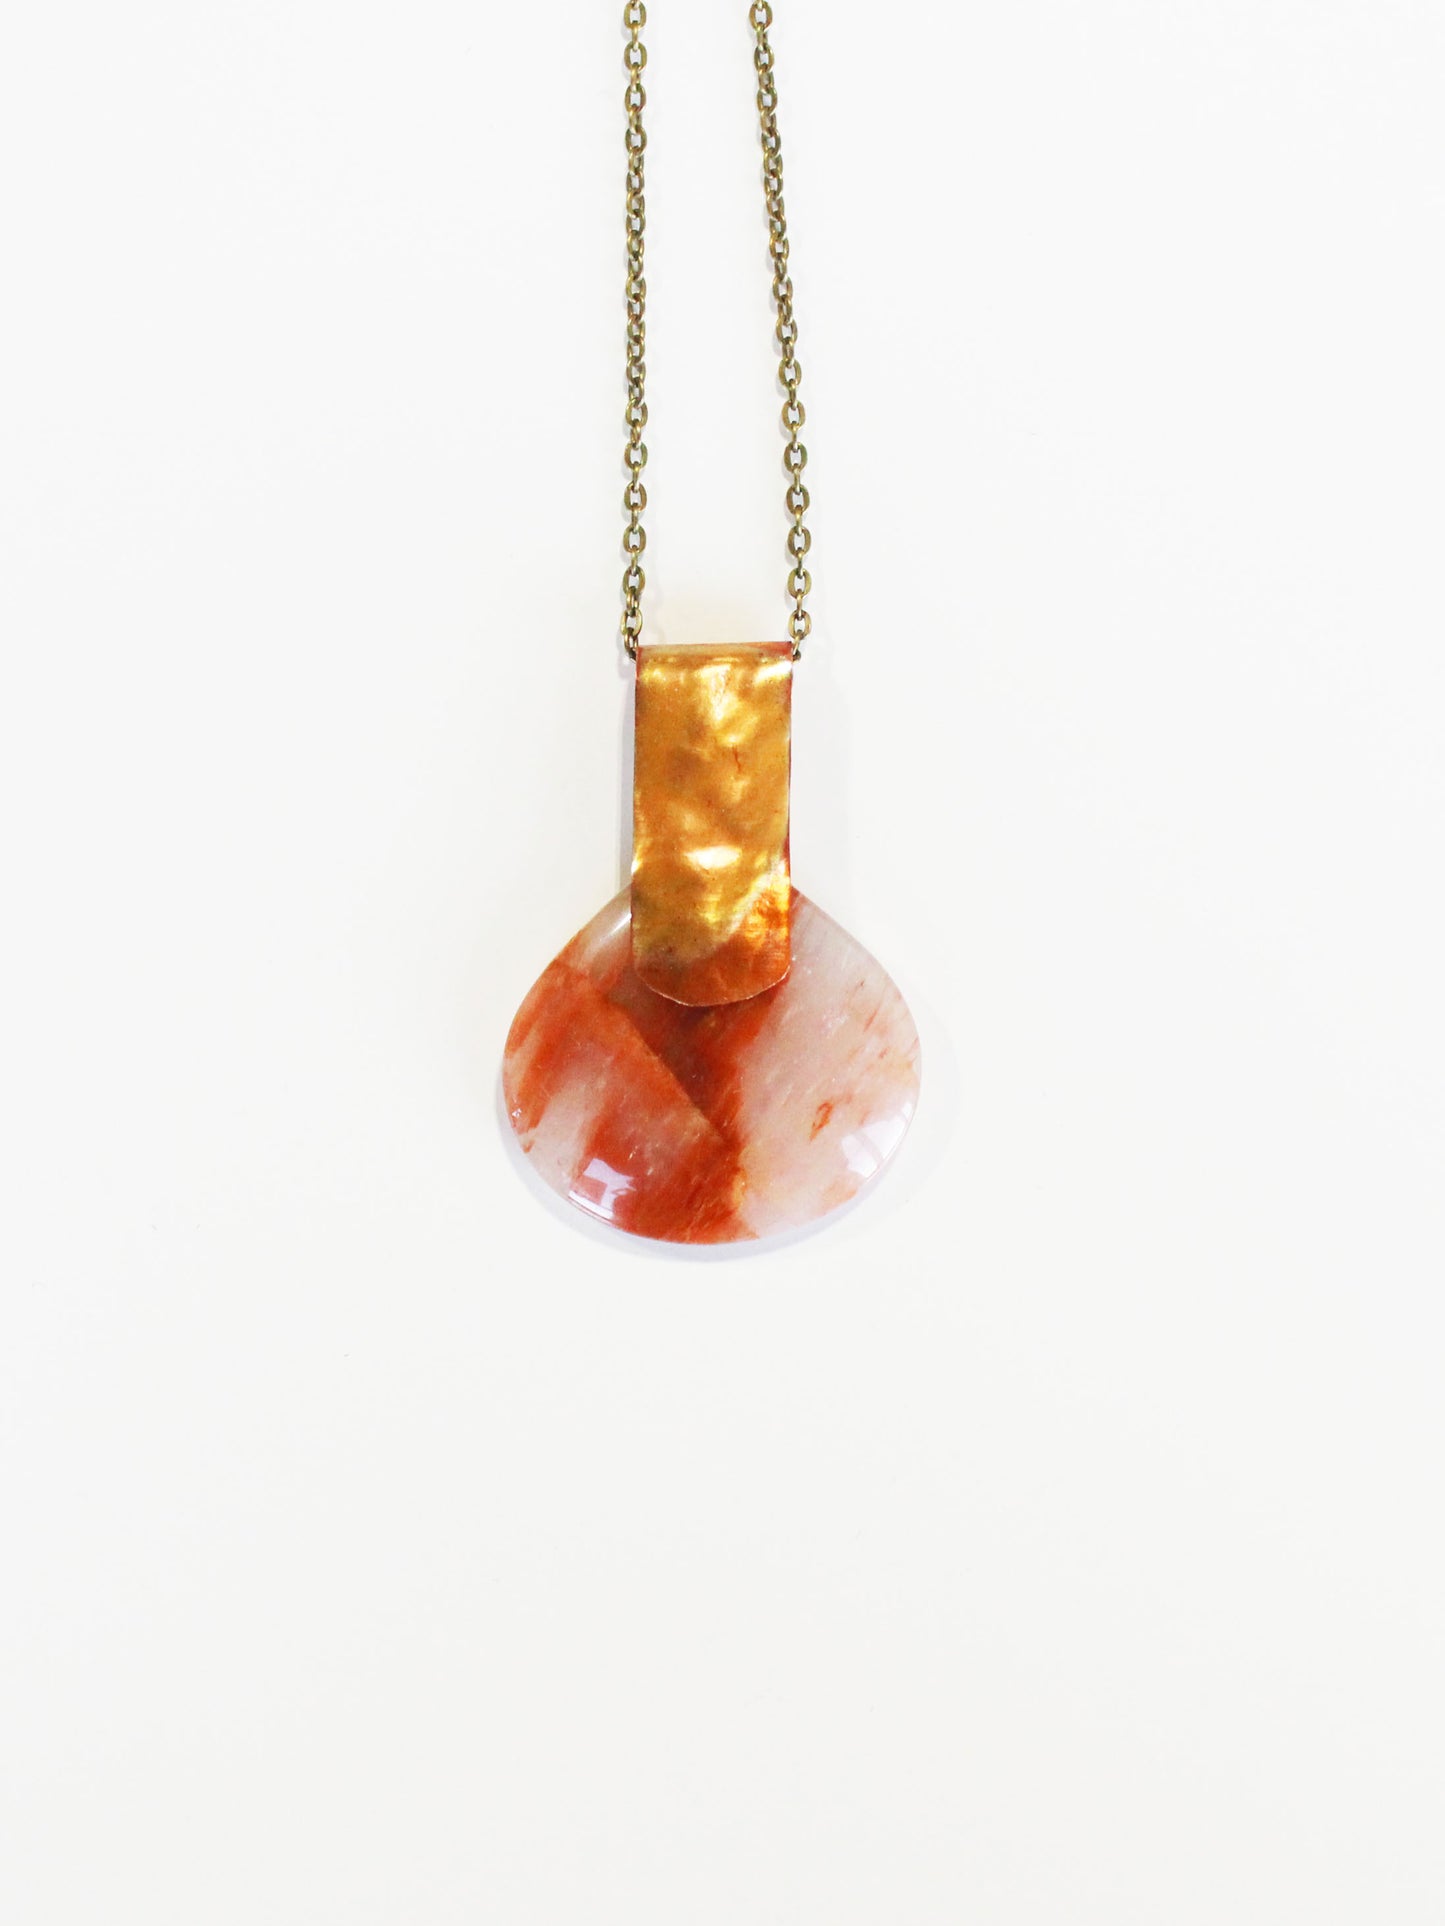 Rejase Create Long Necklace - Agate Polished Stone